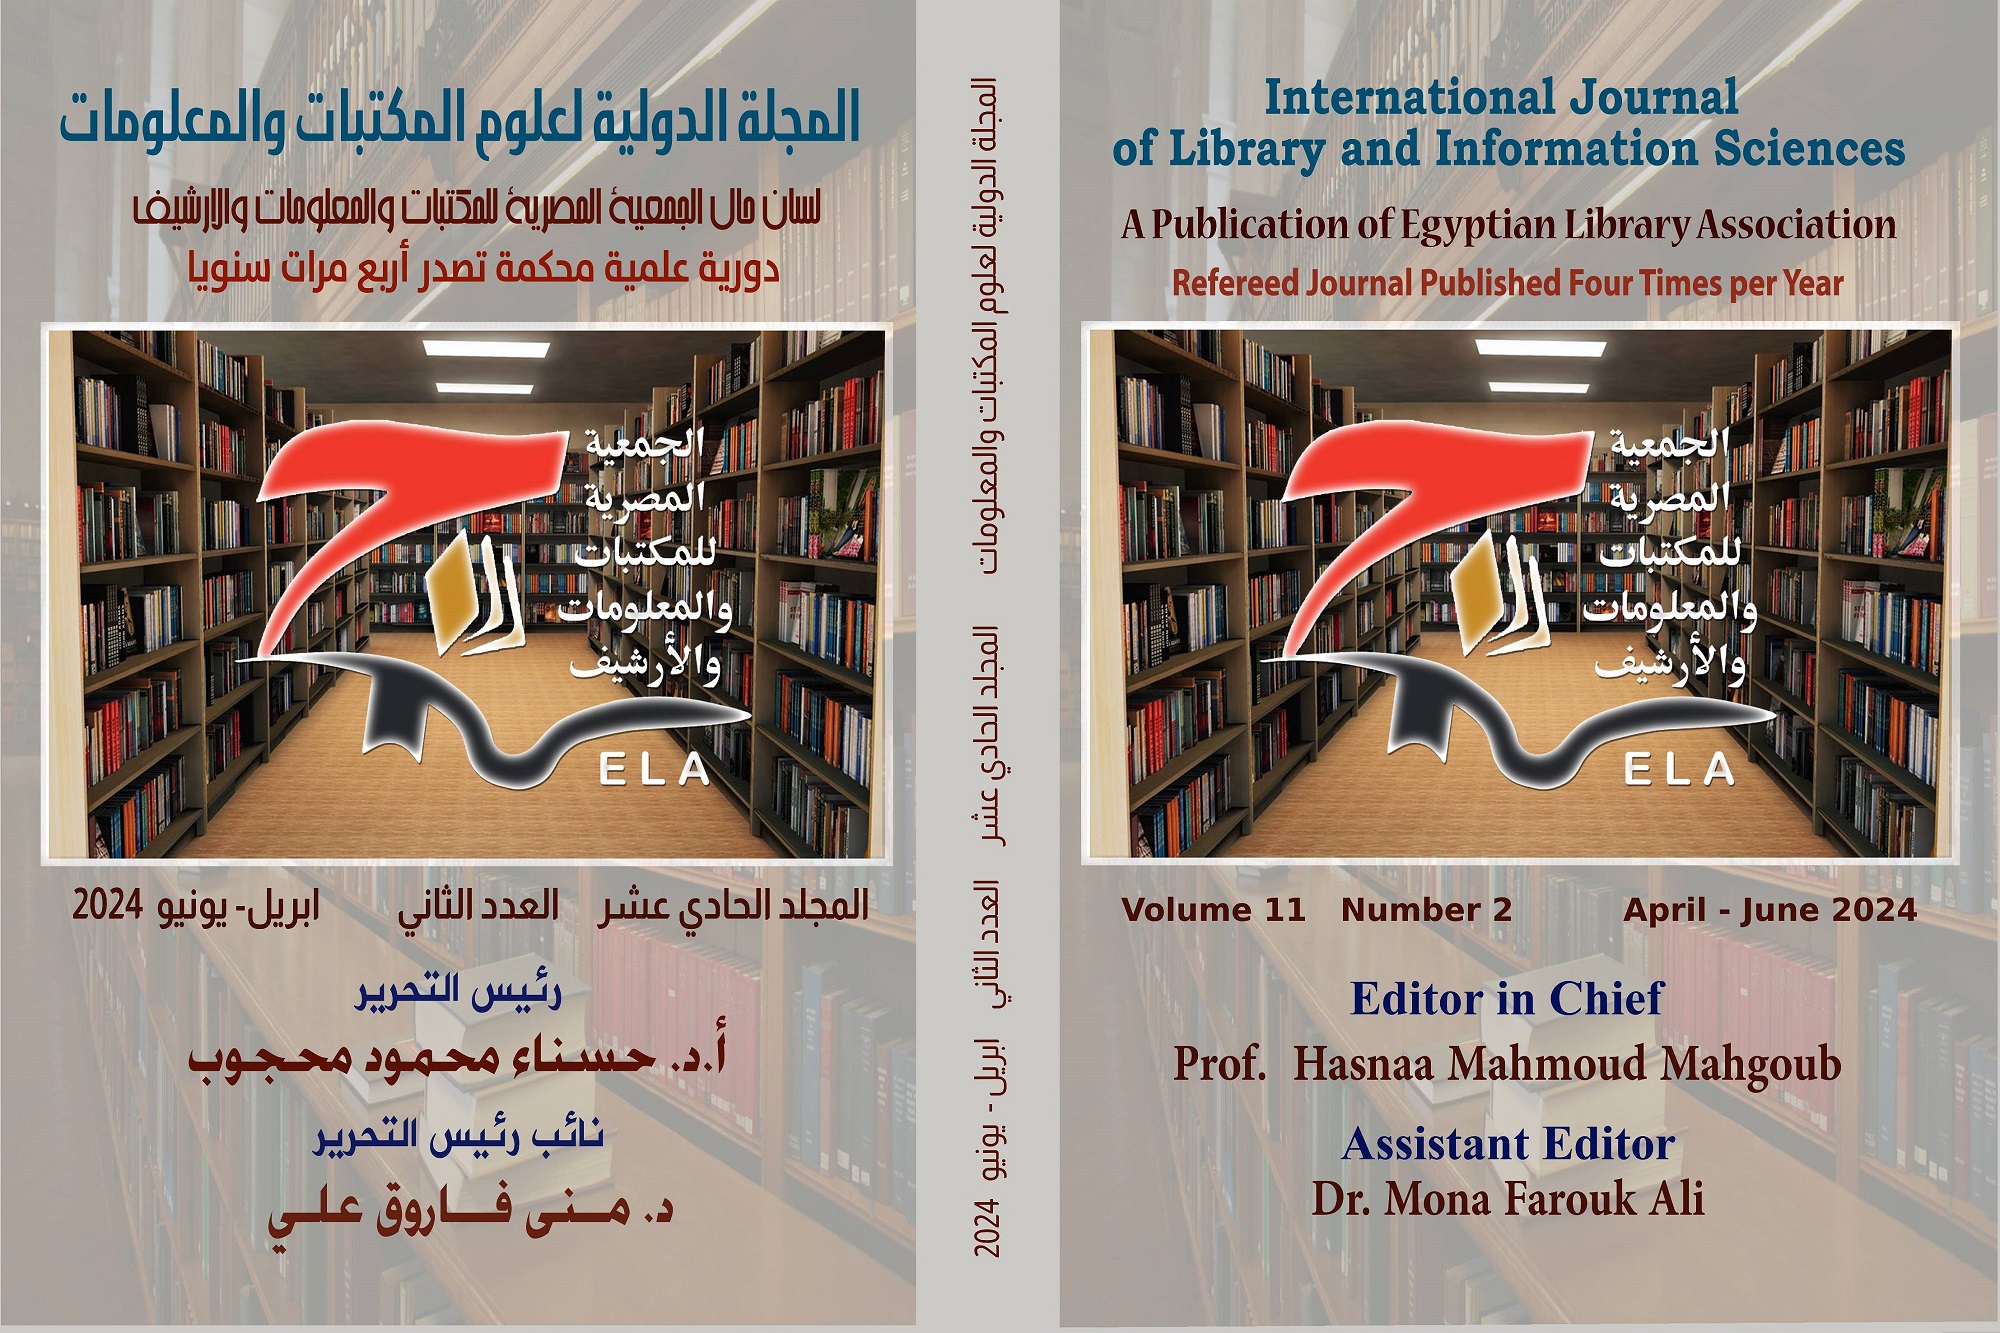 International Journal of Library and Information Sciences